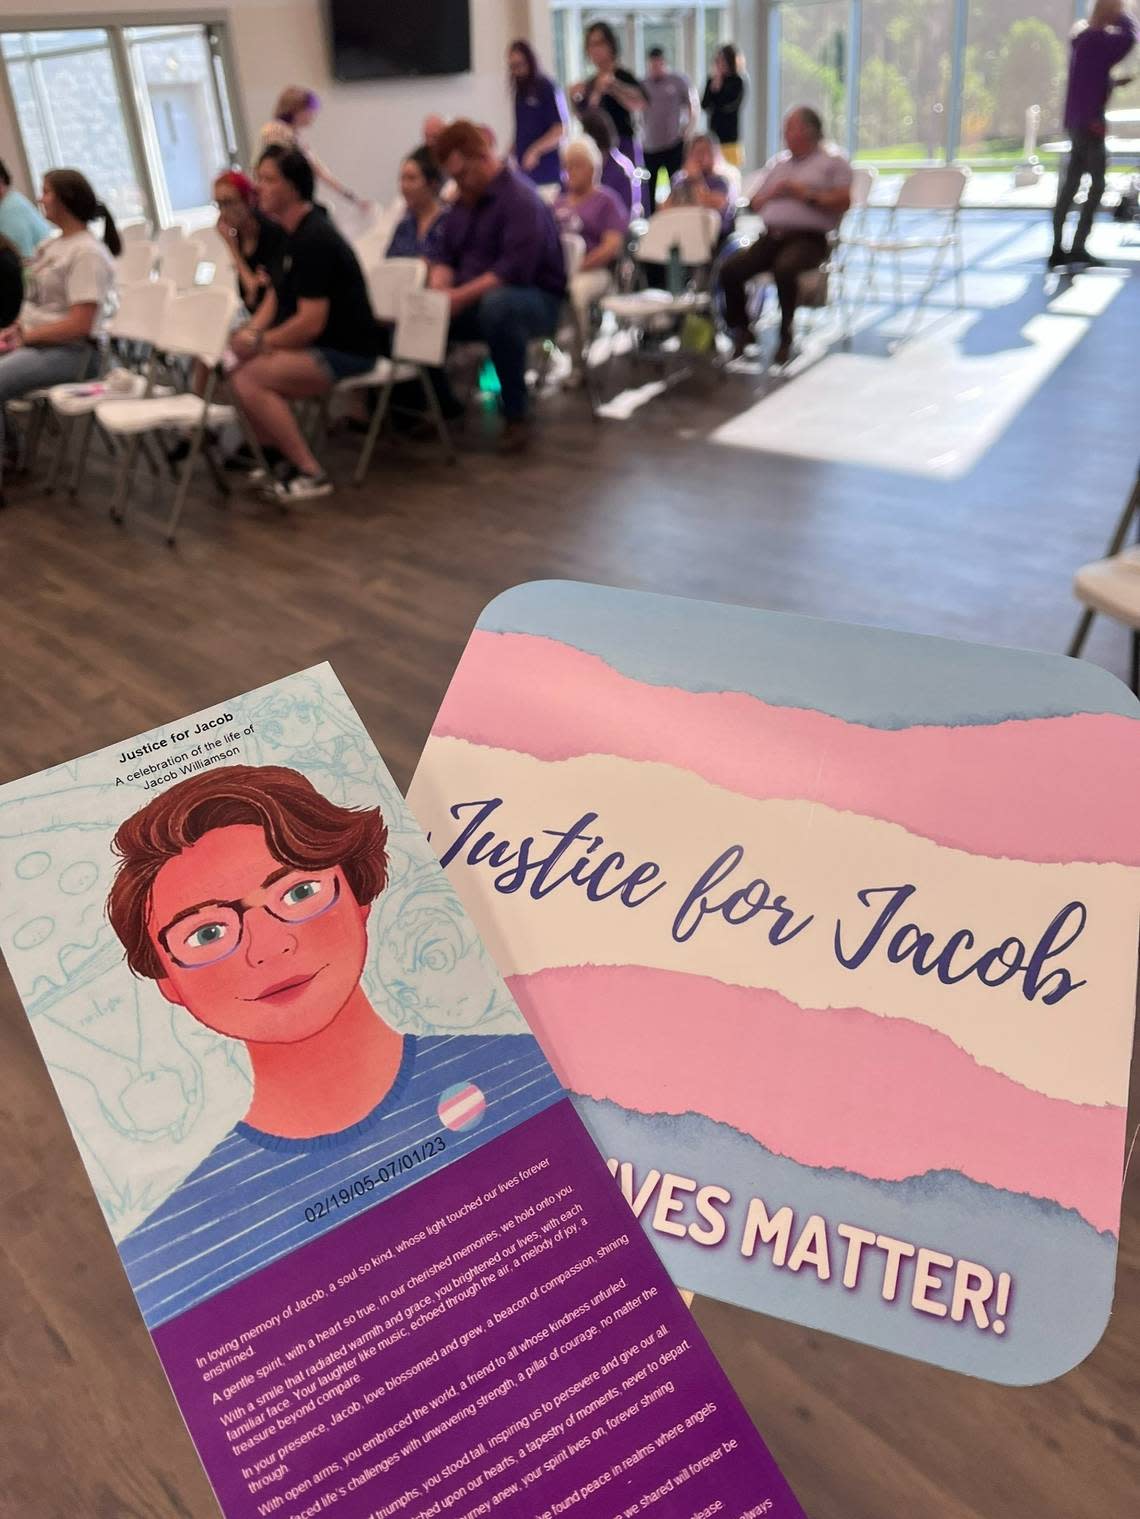 Attendees at Jacob Williamson’s vigil in Laurens, S.C., were handed a program with a portrait drawing of the 18-year-old, and a fan featuring transgender flag colors and the phrase “Justice for Jacob.”